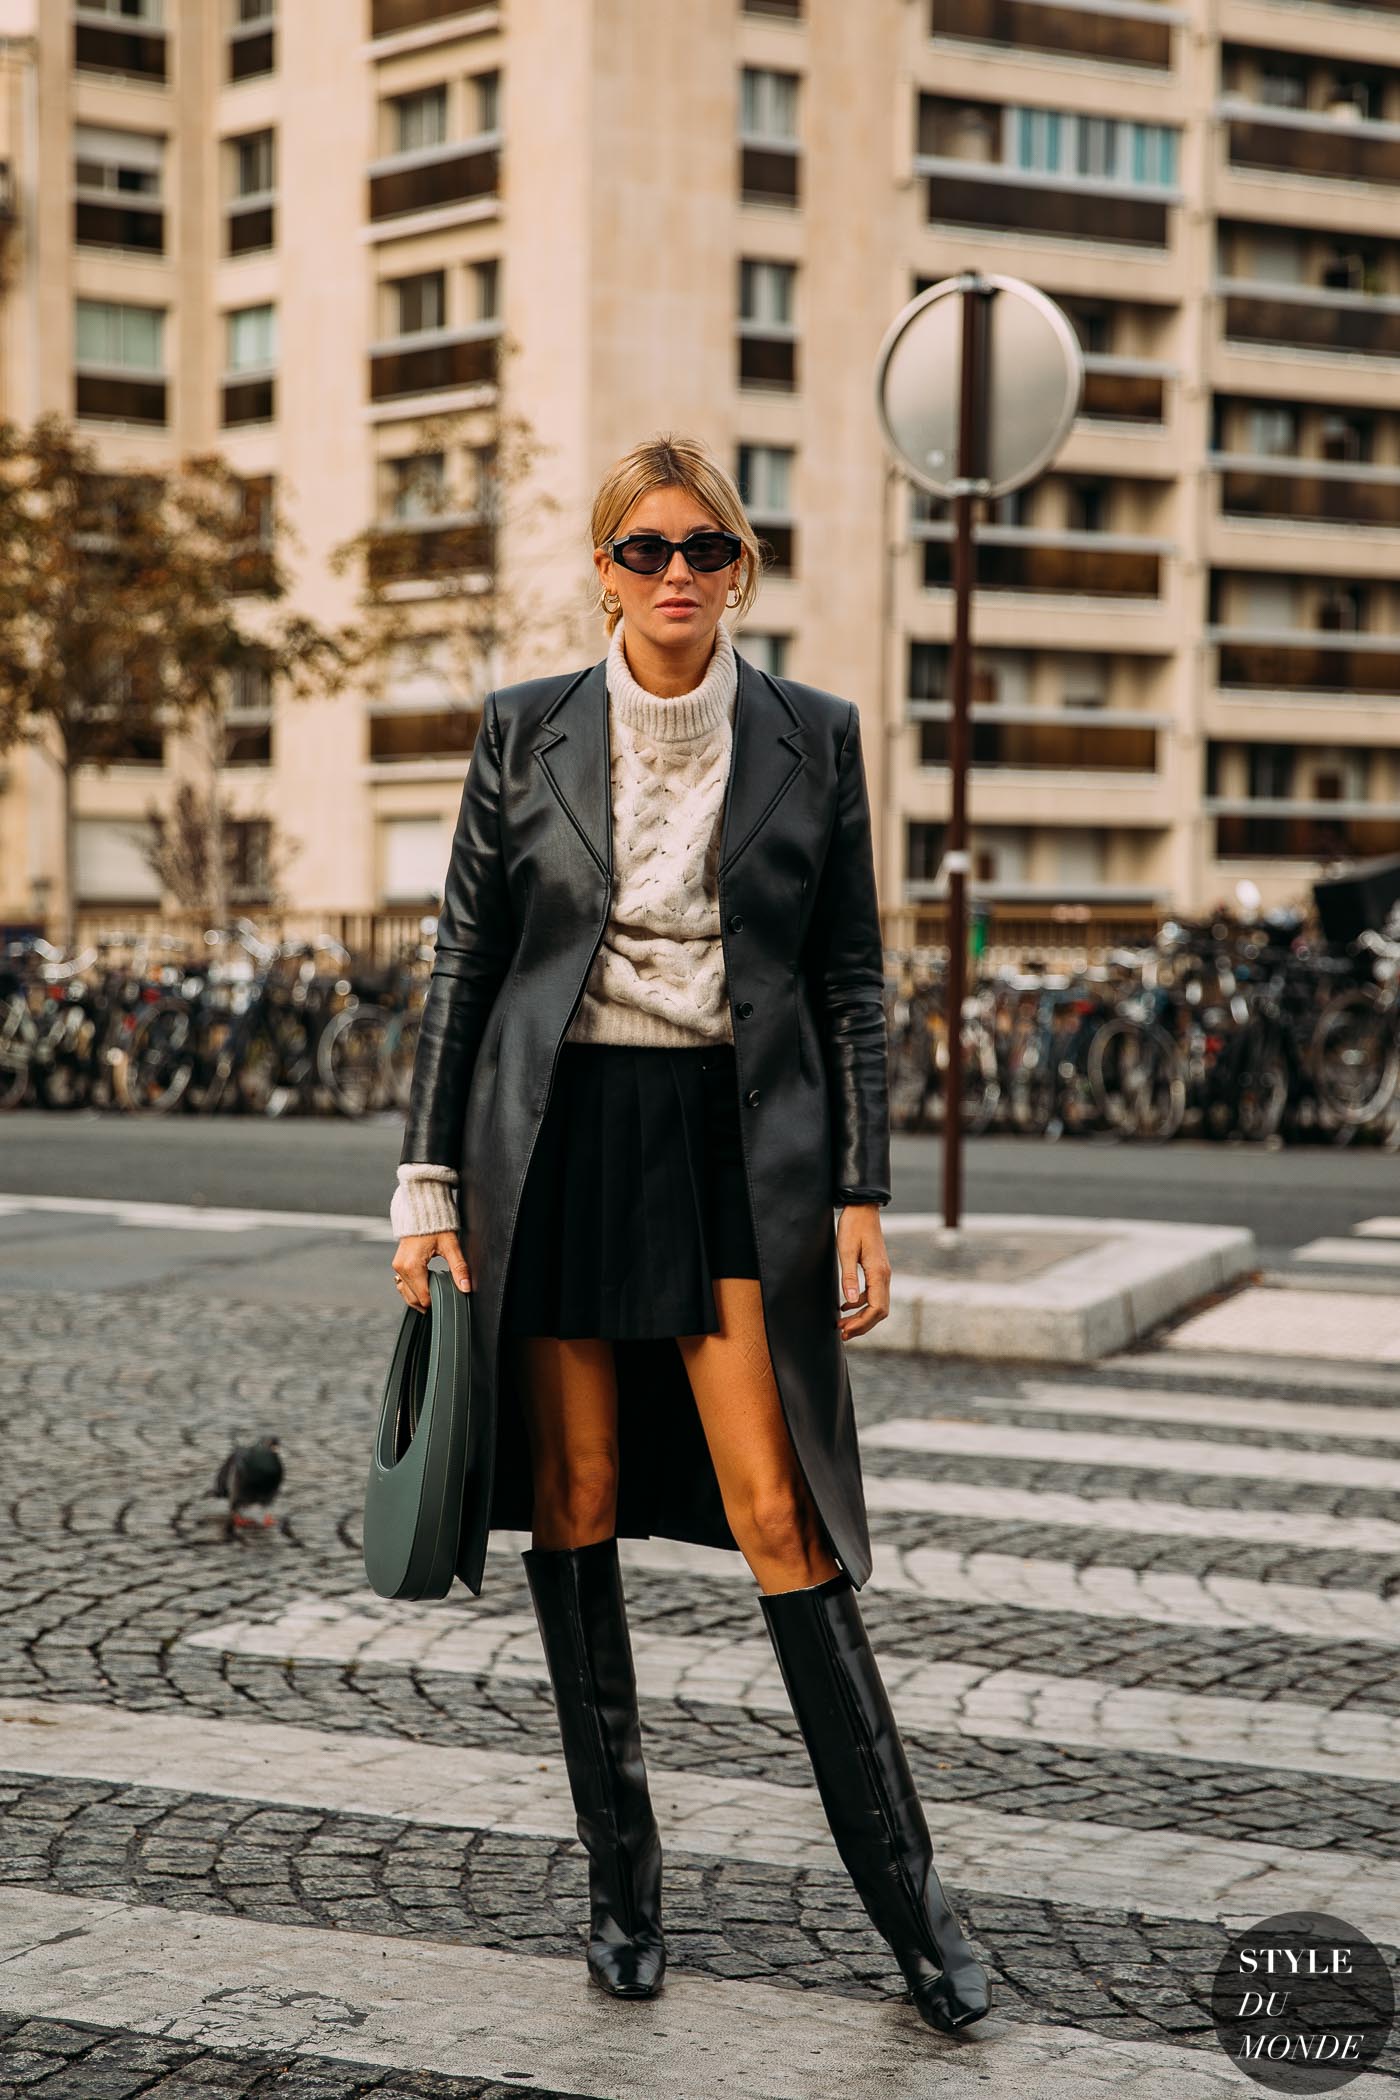 Paris SS 2021 Street Style: Camille Charriere